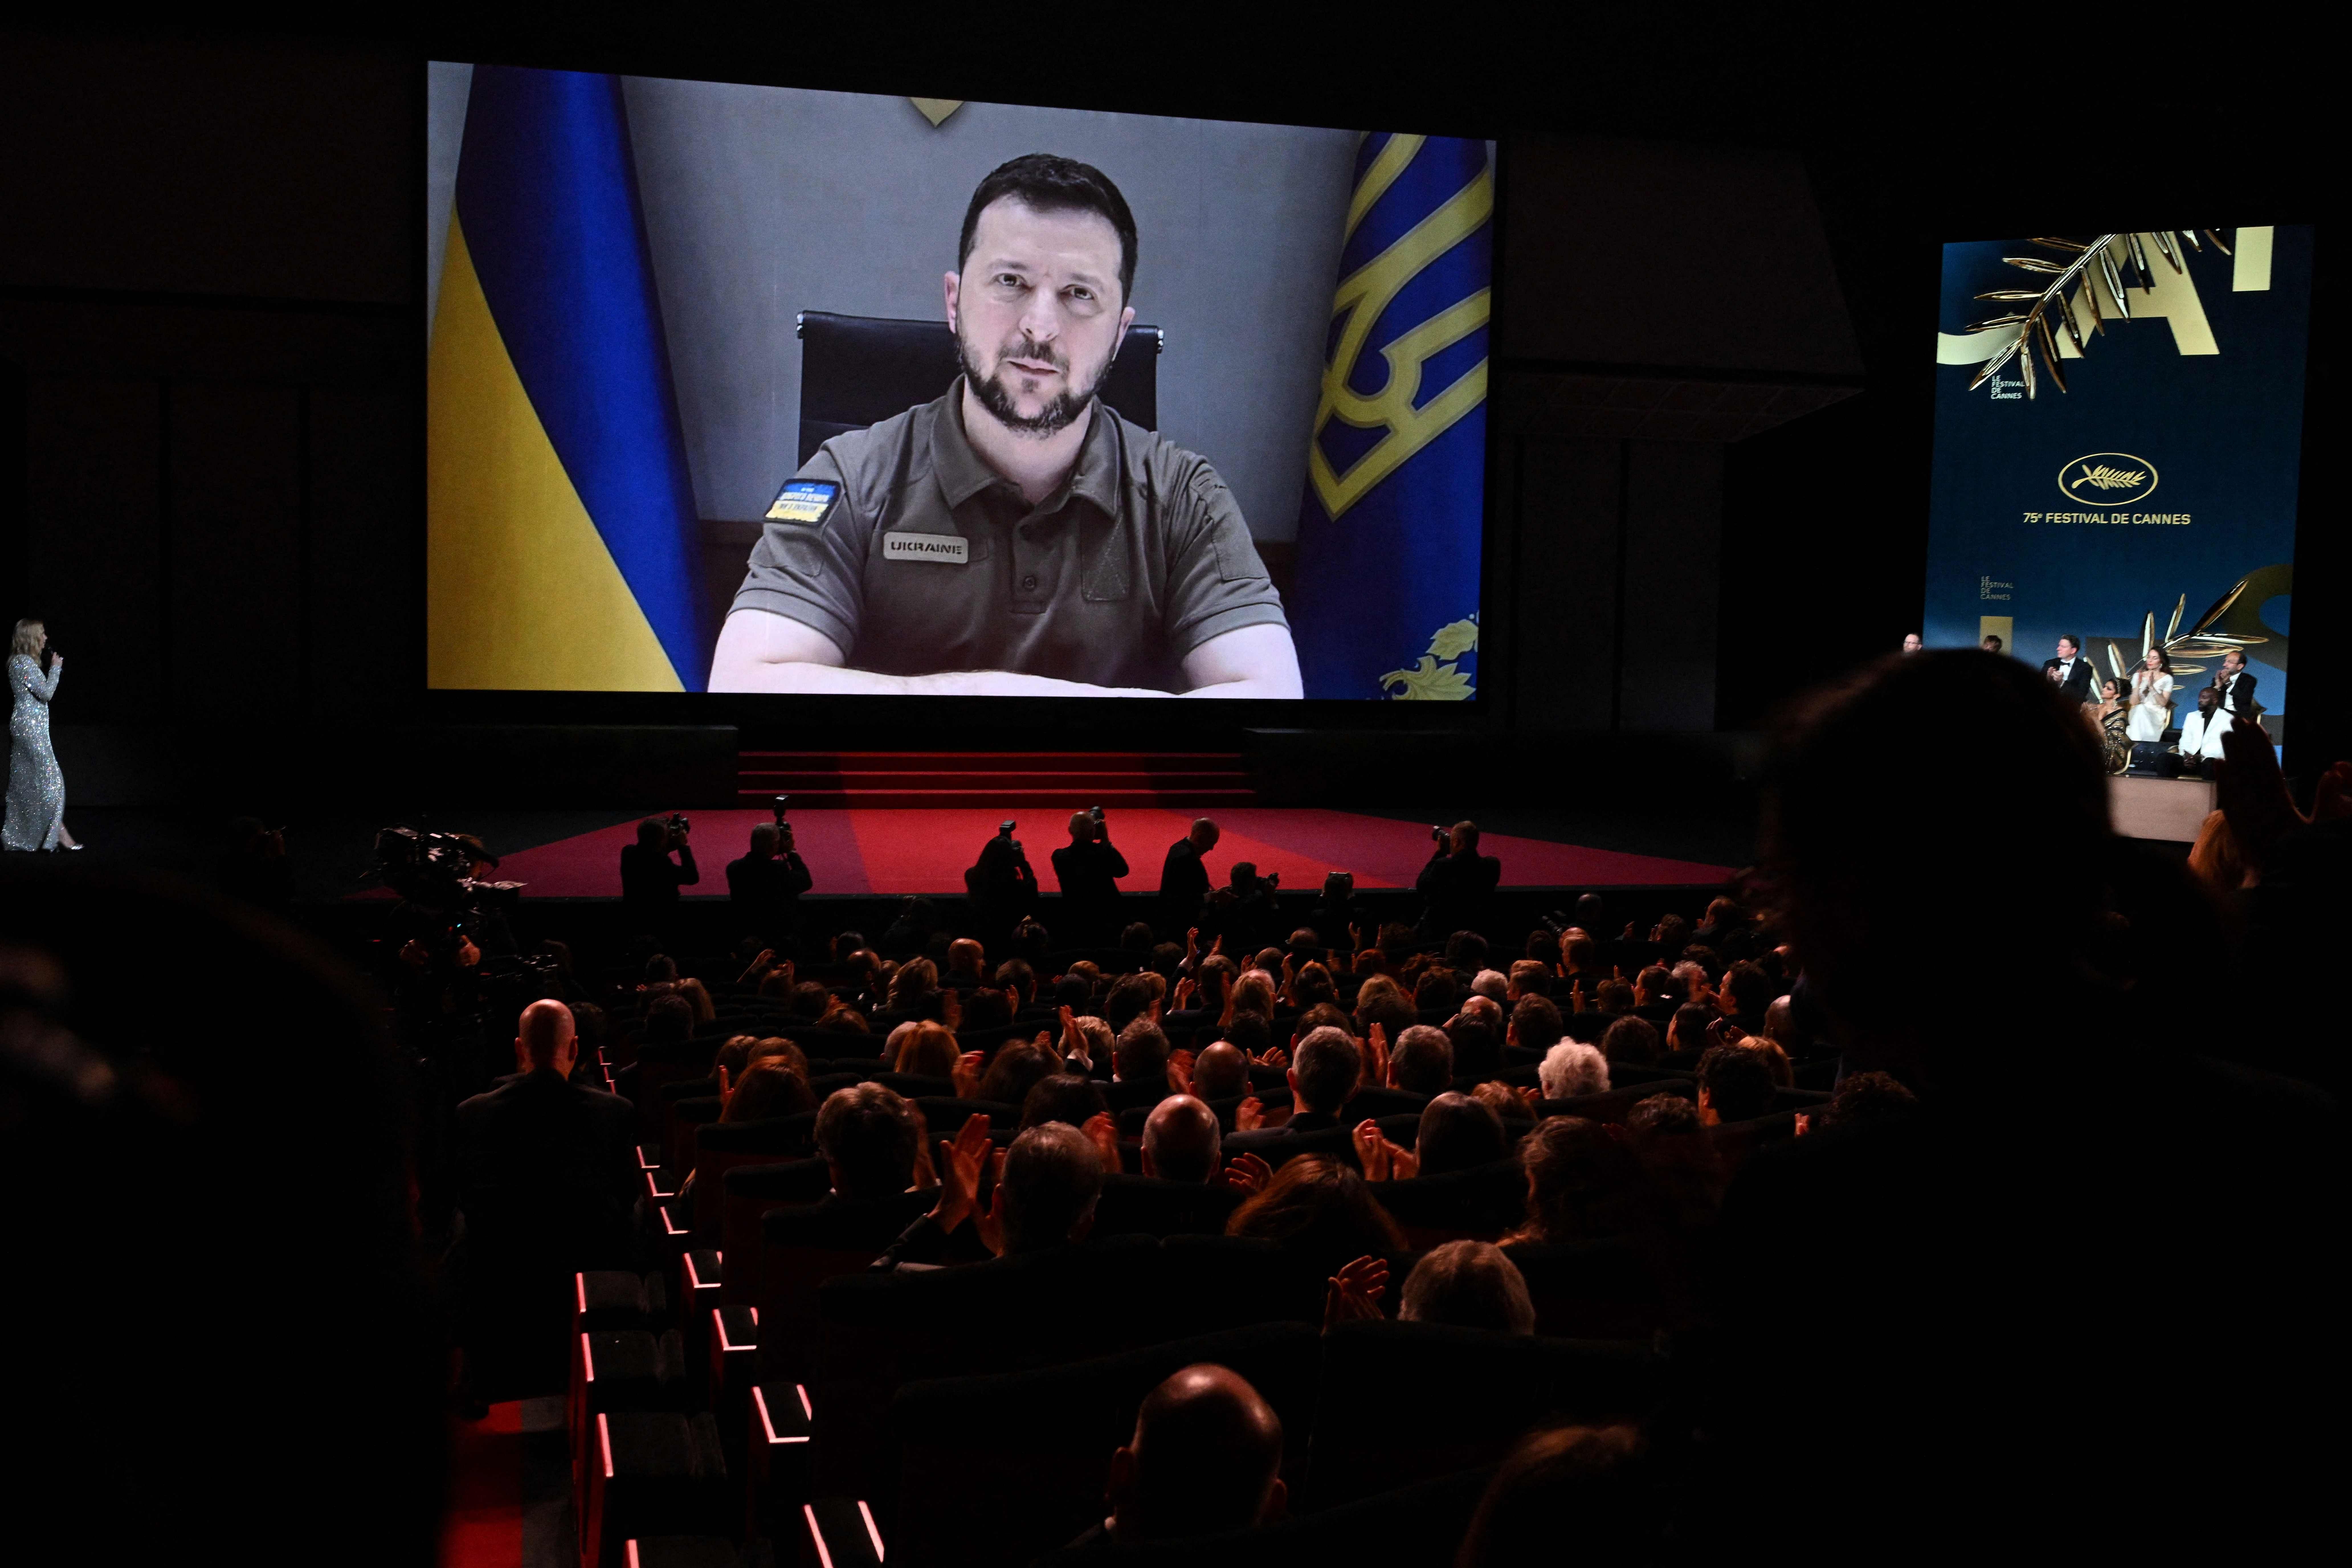 Ukrainian President Volodymyr Zelenskyy addresses guests during the Opening Ceremony of the 75th edition of the Cannes Film Festival in Cannes, southern France. Credit: AFP Photo